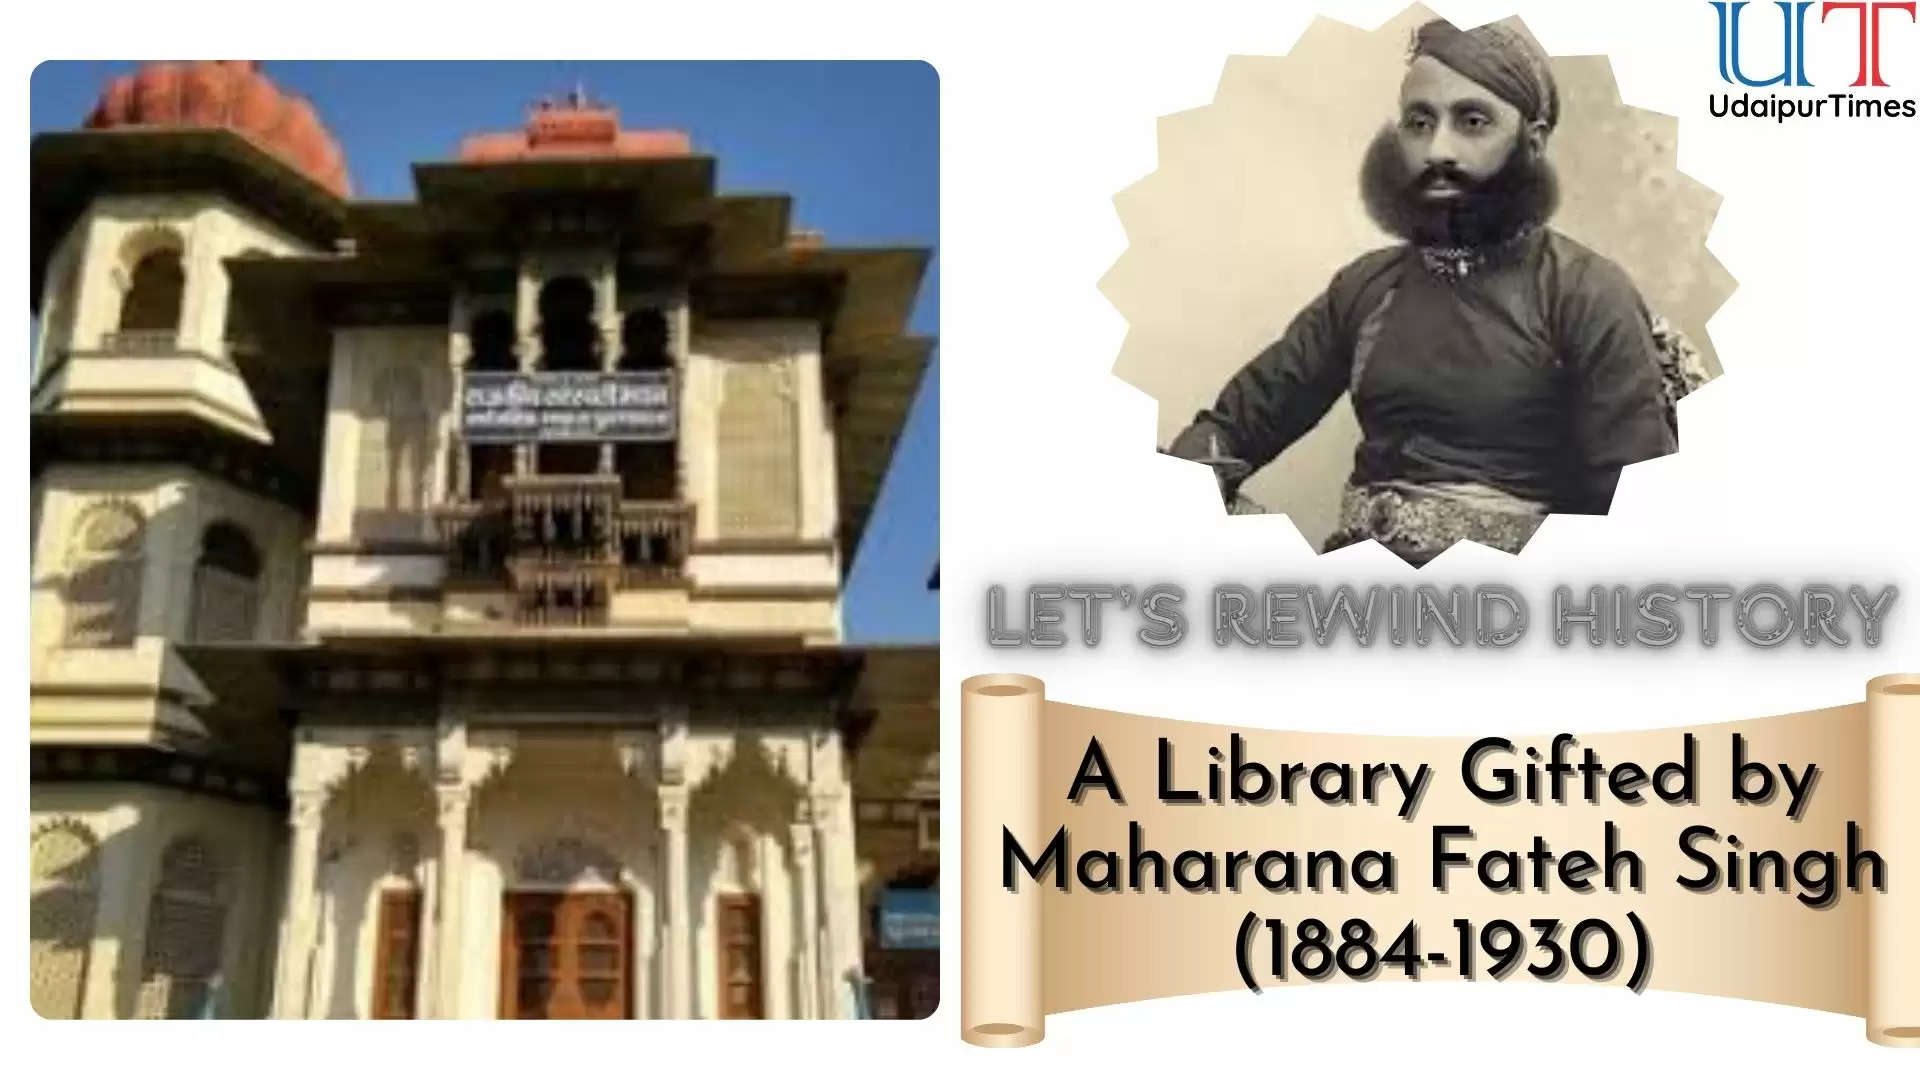 Saraswati Bhawan Library Gifted by Maharana Fateh Singh to Queen Victoria